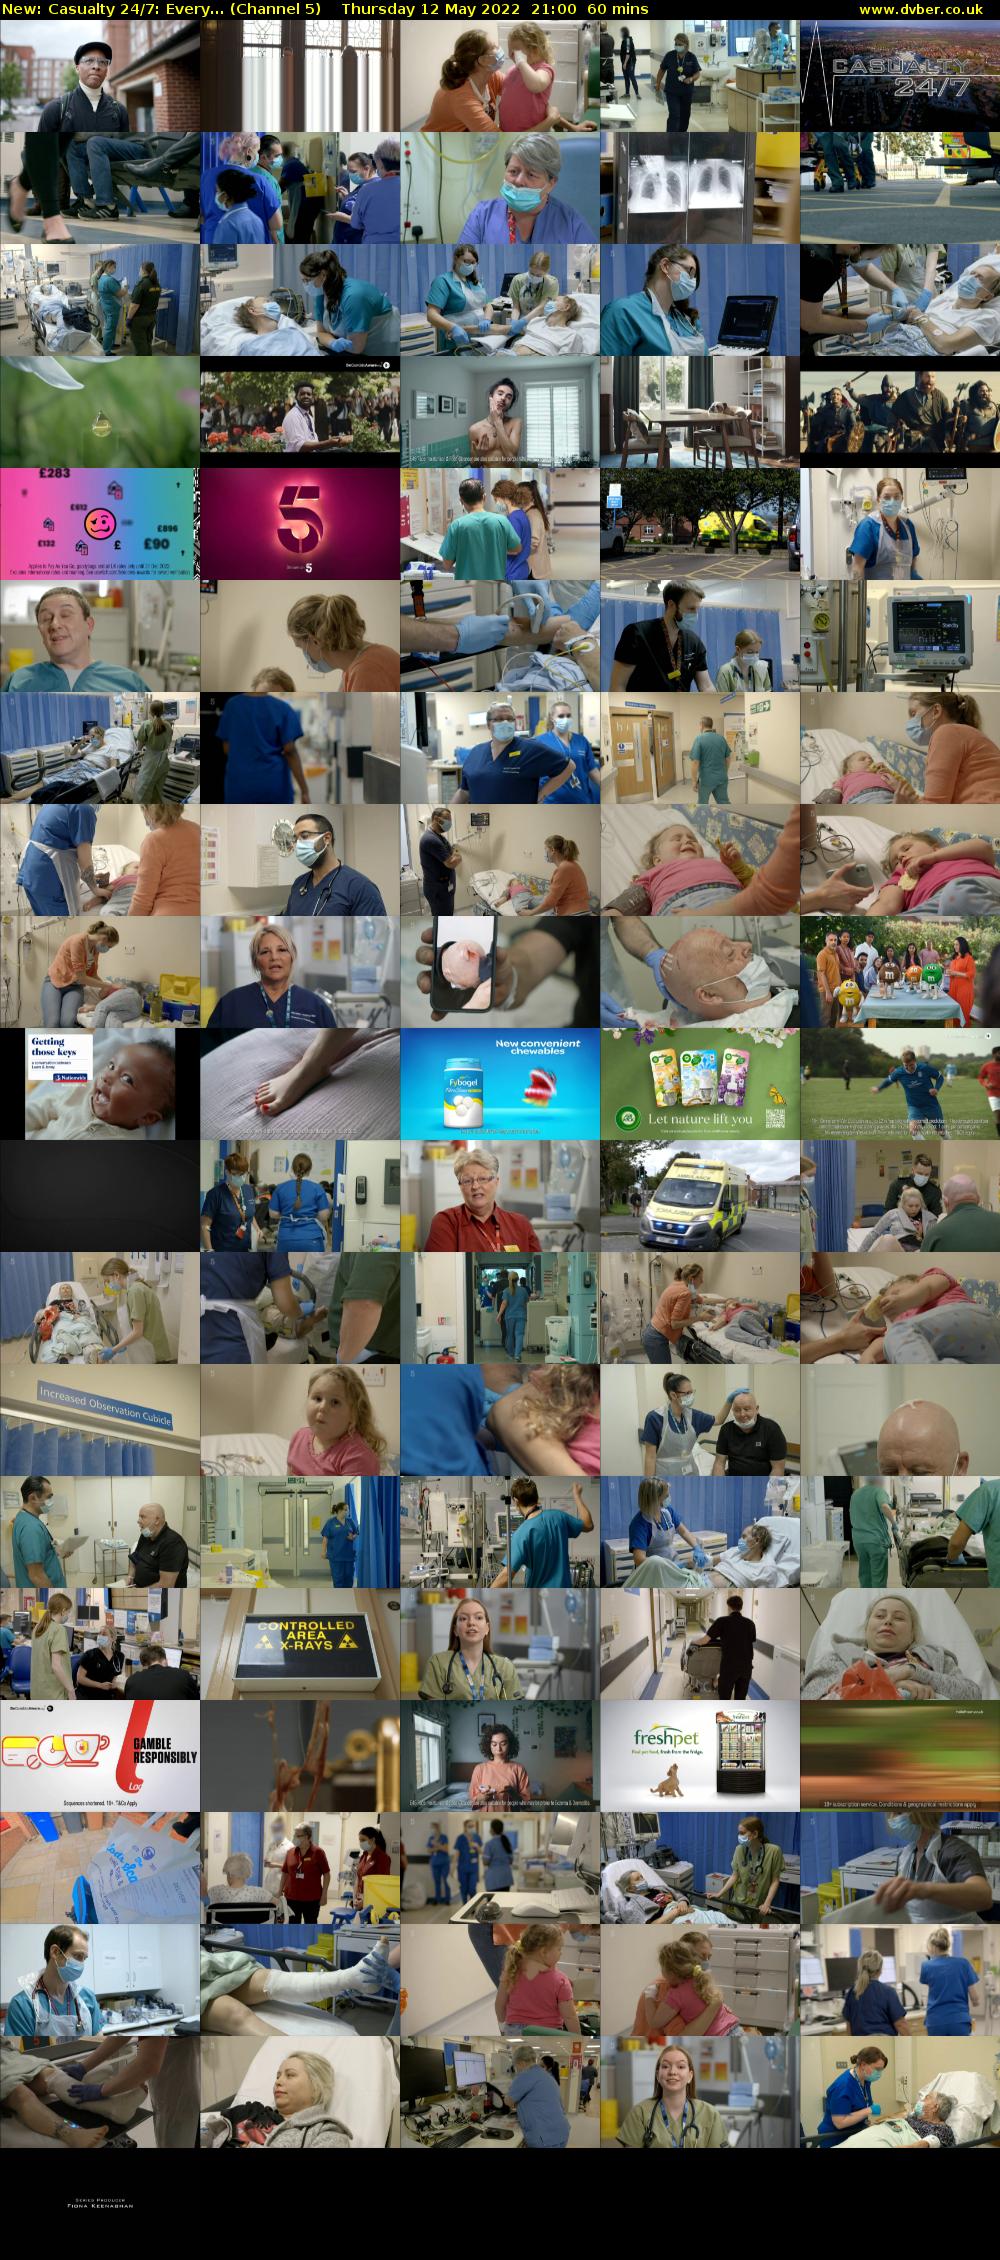 Casualty 24/7: Every... (Channel 5) Thursday 12 May 2022 21:00 - 22:00